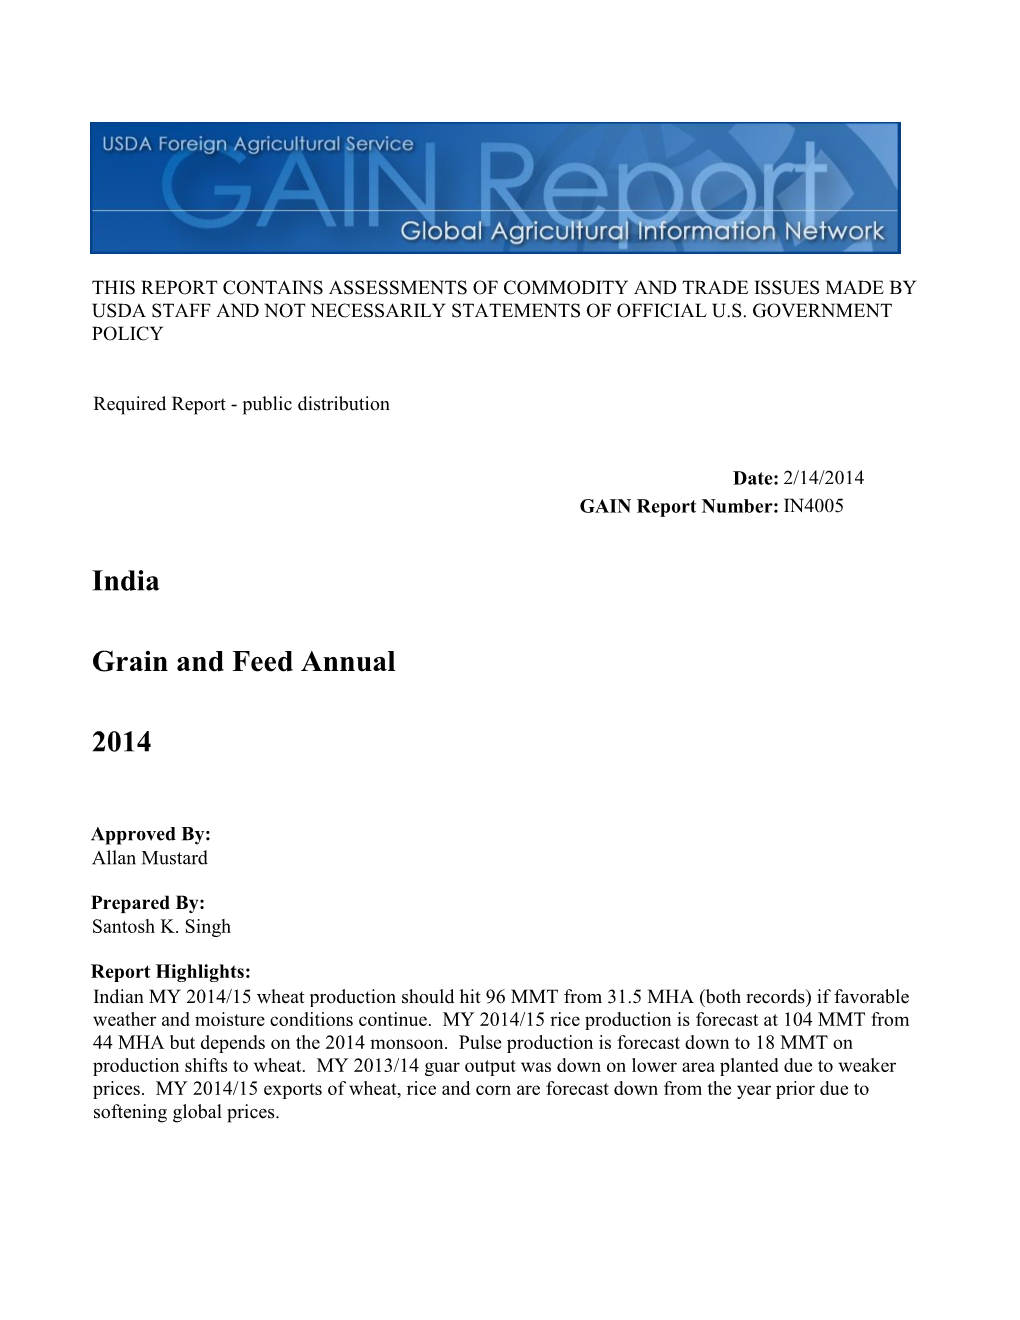 2014 Grain and Feed Annual India